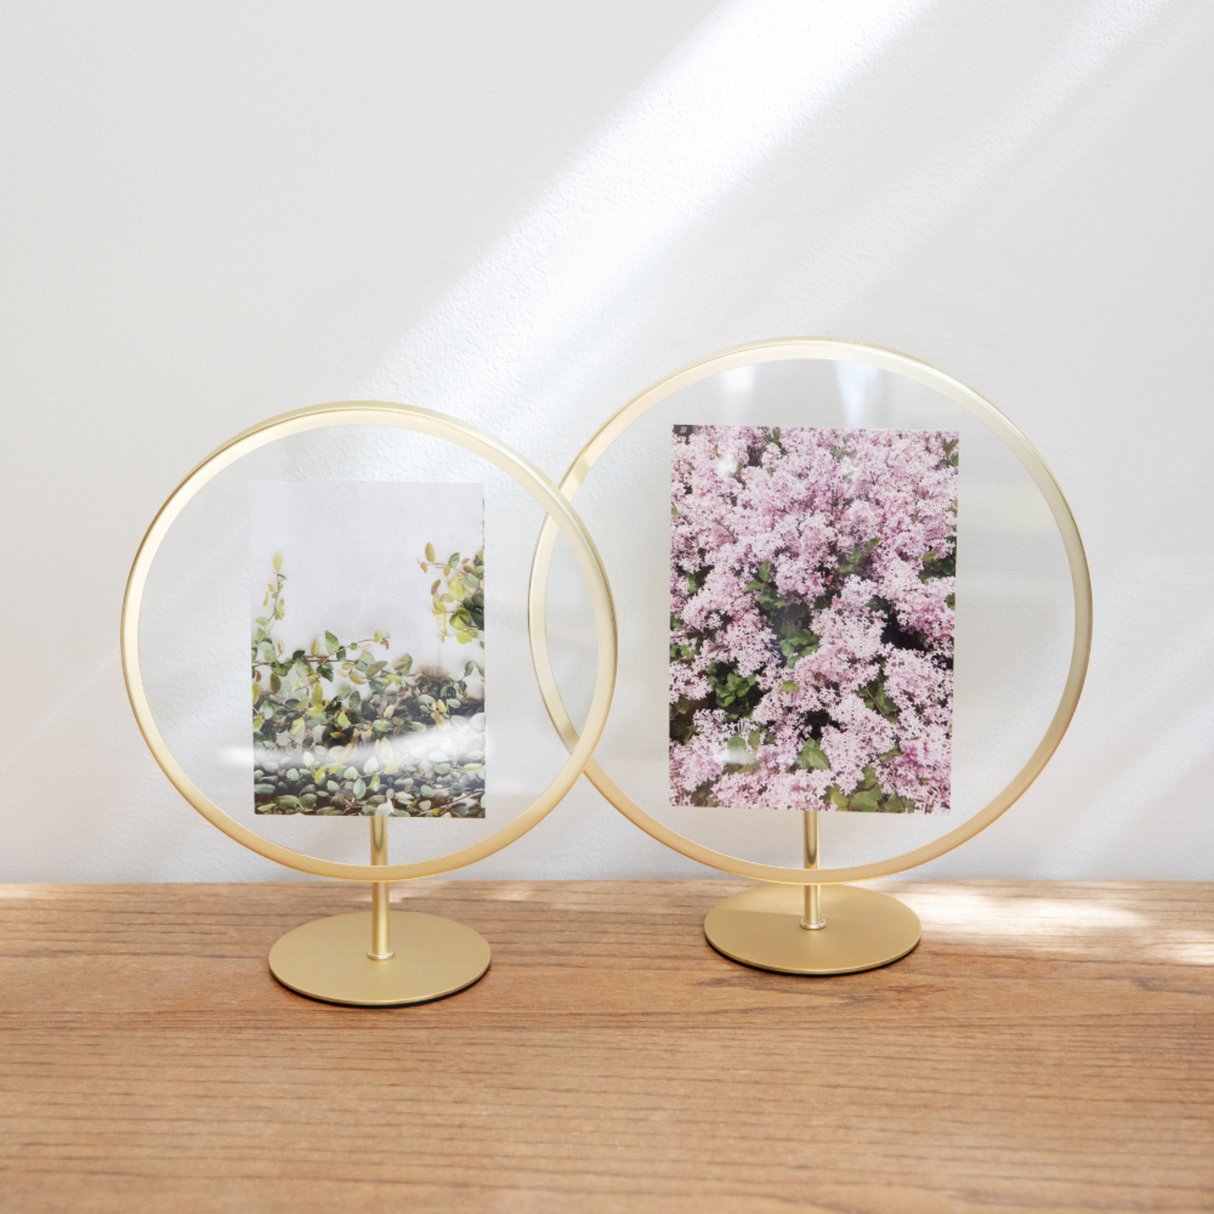 Infinity Picture Frame – Umbra UK